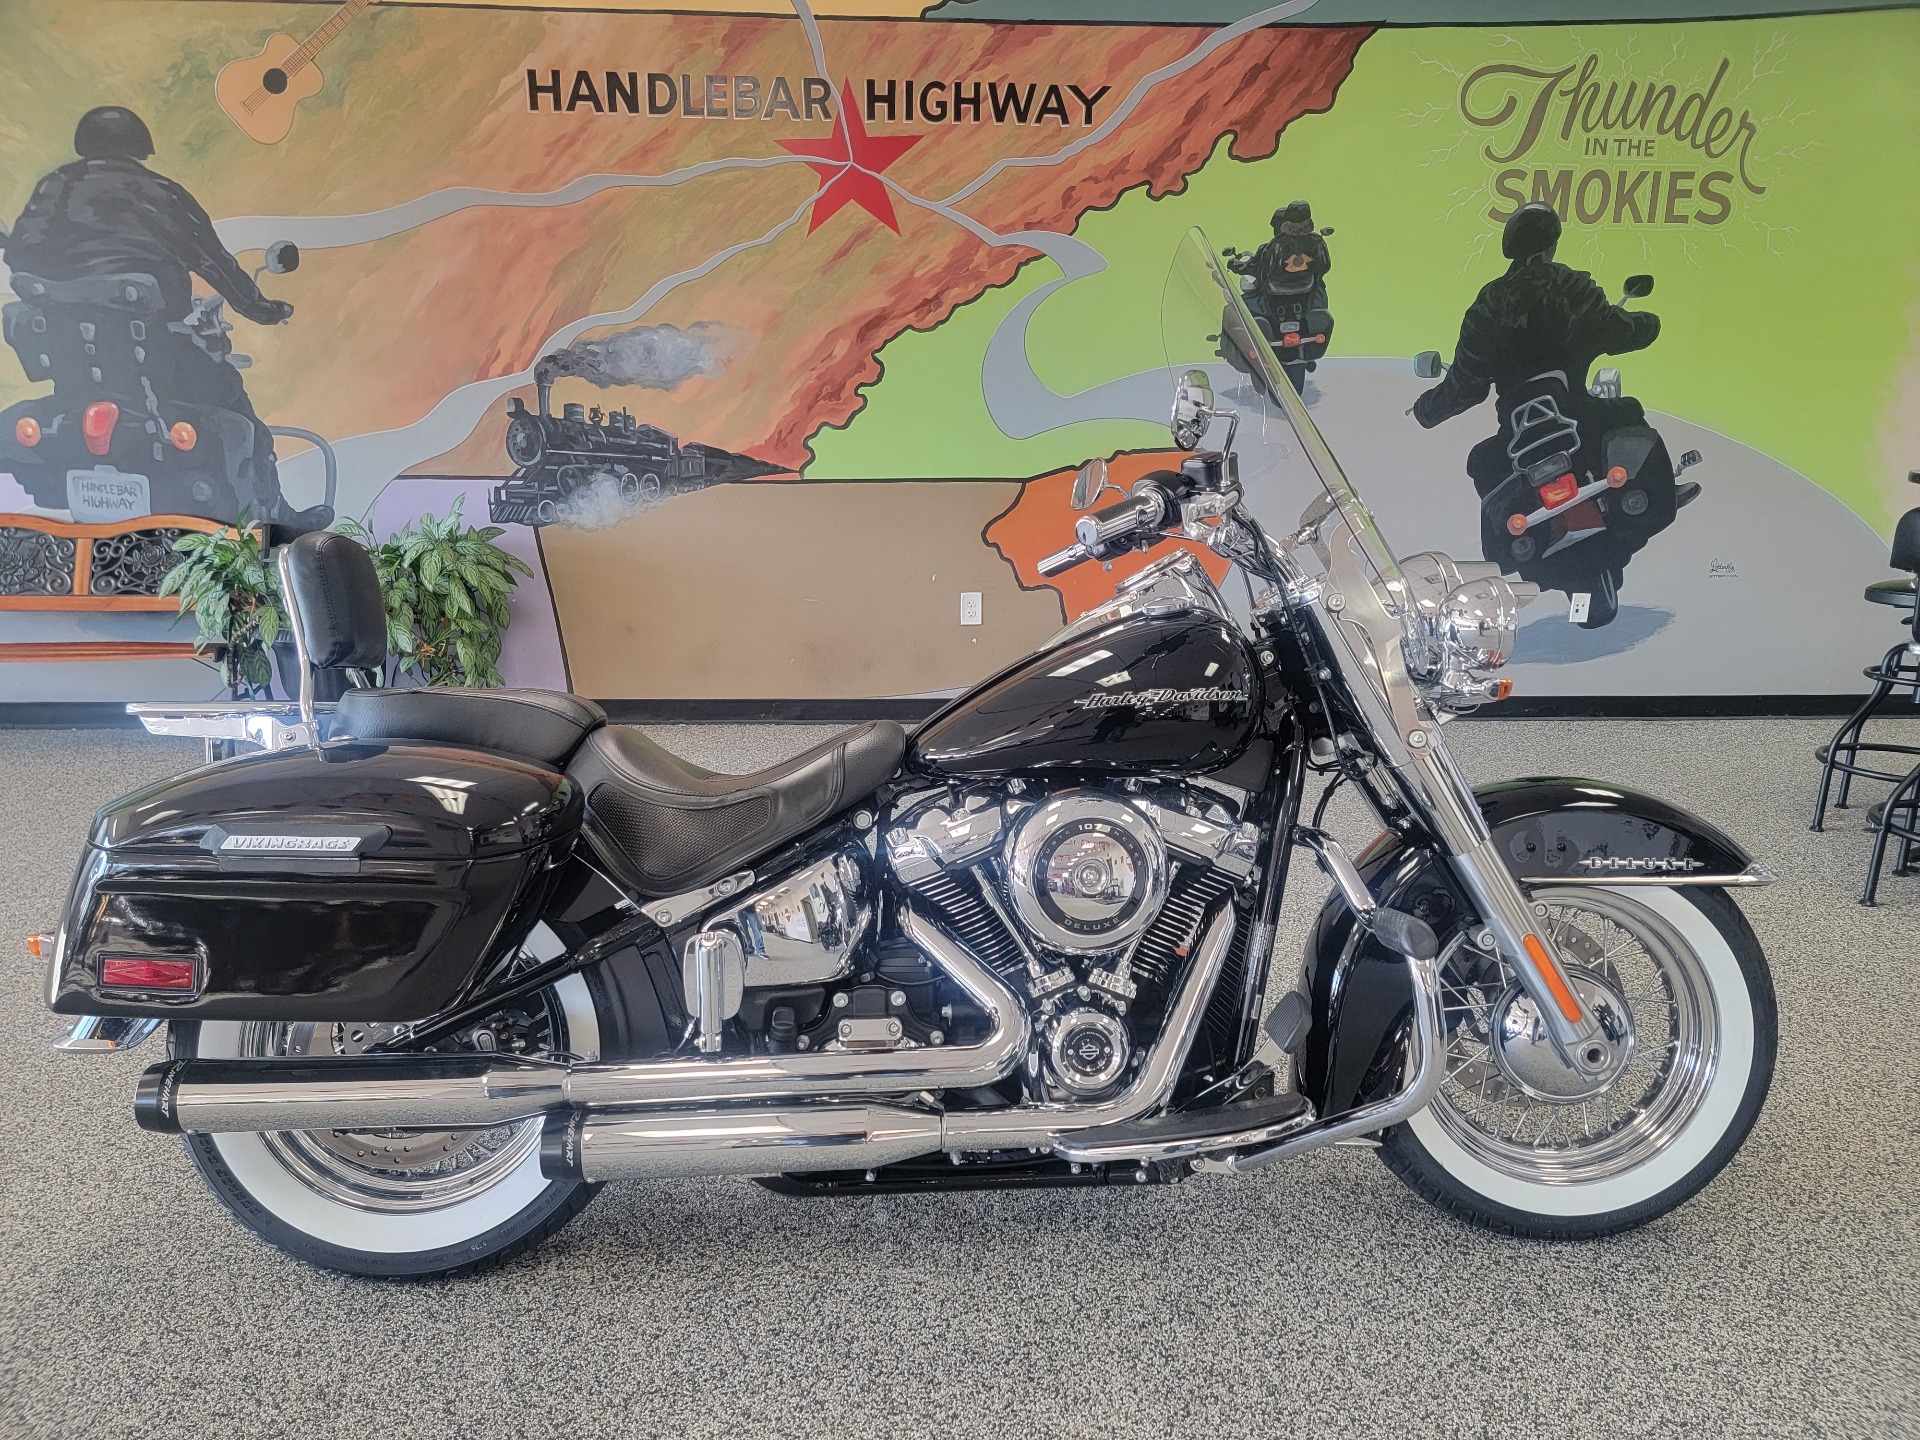 2019 Harley-Davidson Deluxe in Knoxville, Tennessee - Photo 1